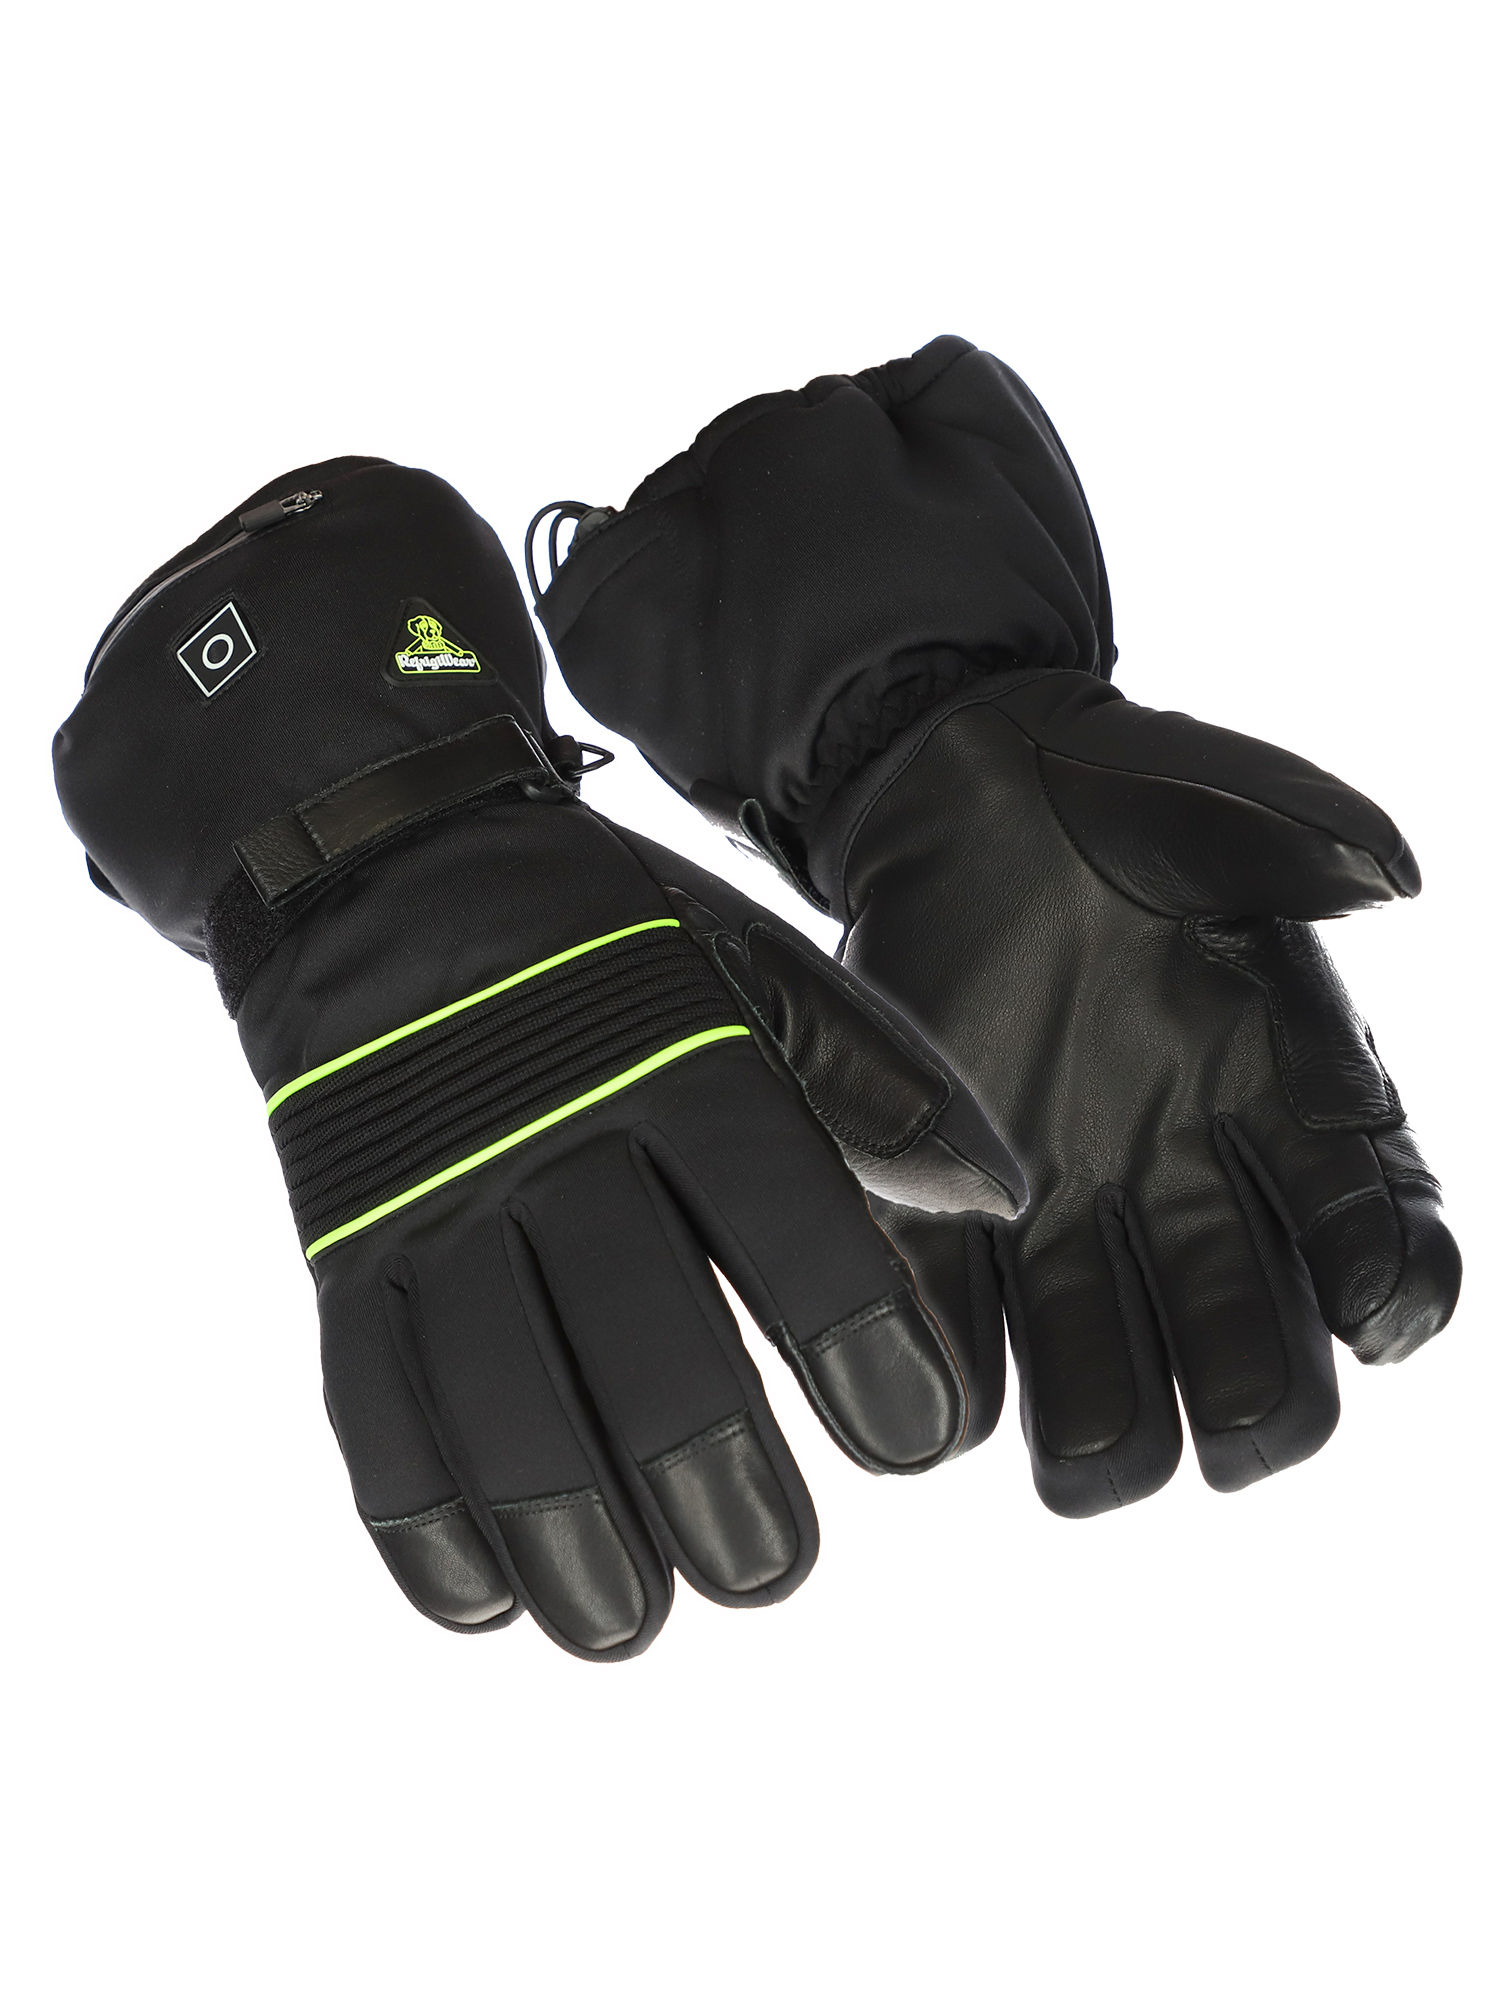 Stay Warm & Protected: Durable Heated Work Gloves with Reinforced Leather &  Wool Lining – 30seven